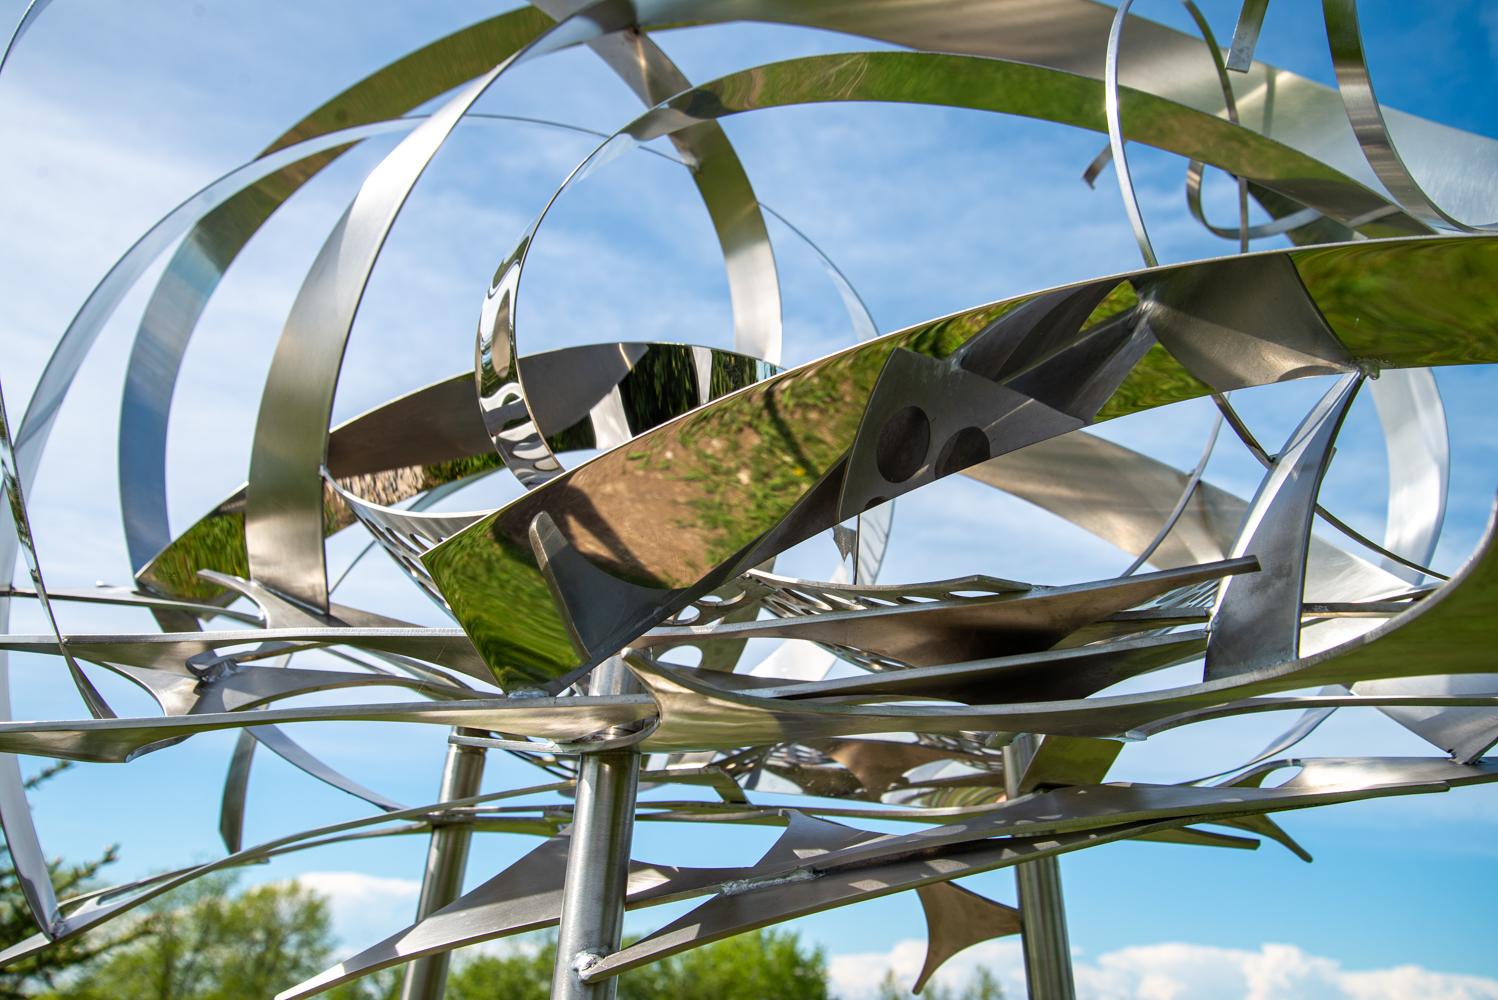 In this elegant sculpture by Ania Biczysko, fine ribbons of stainless-steel overlap in circles forming a cloud-like structure mounted on a tripod stand. When viewed from all sides, the sky is reflected in the luminescent quality of the polished